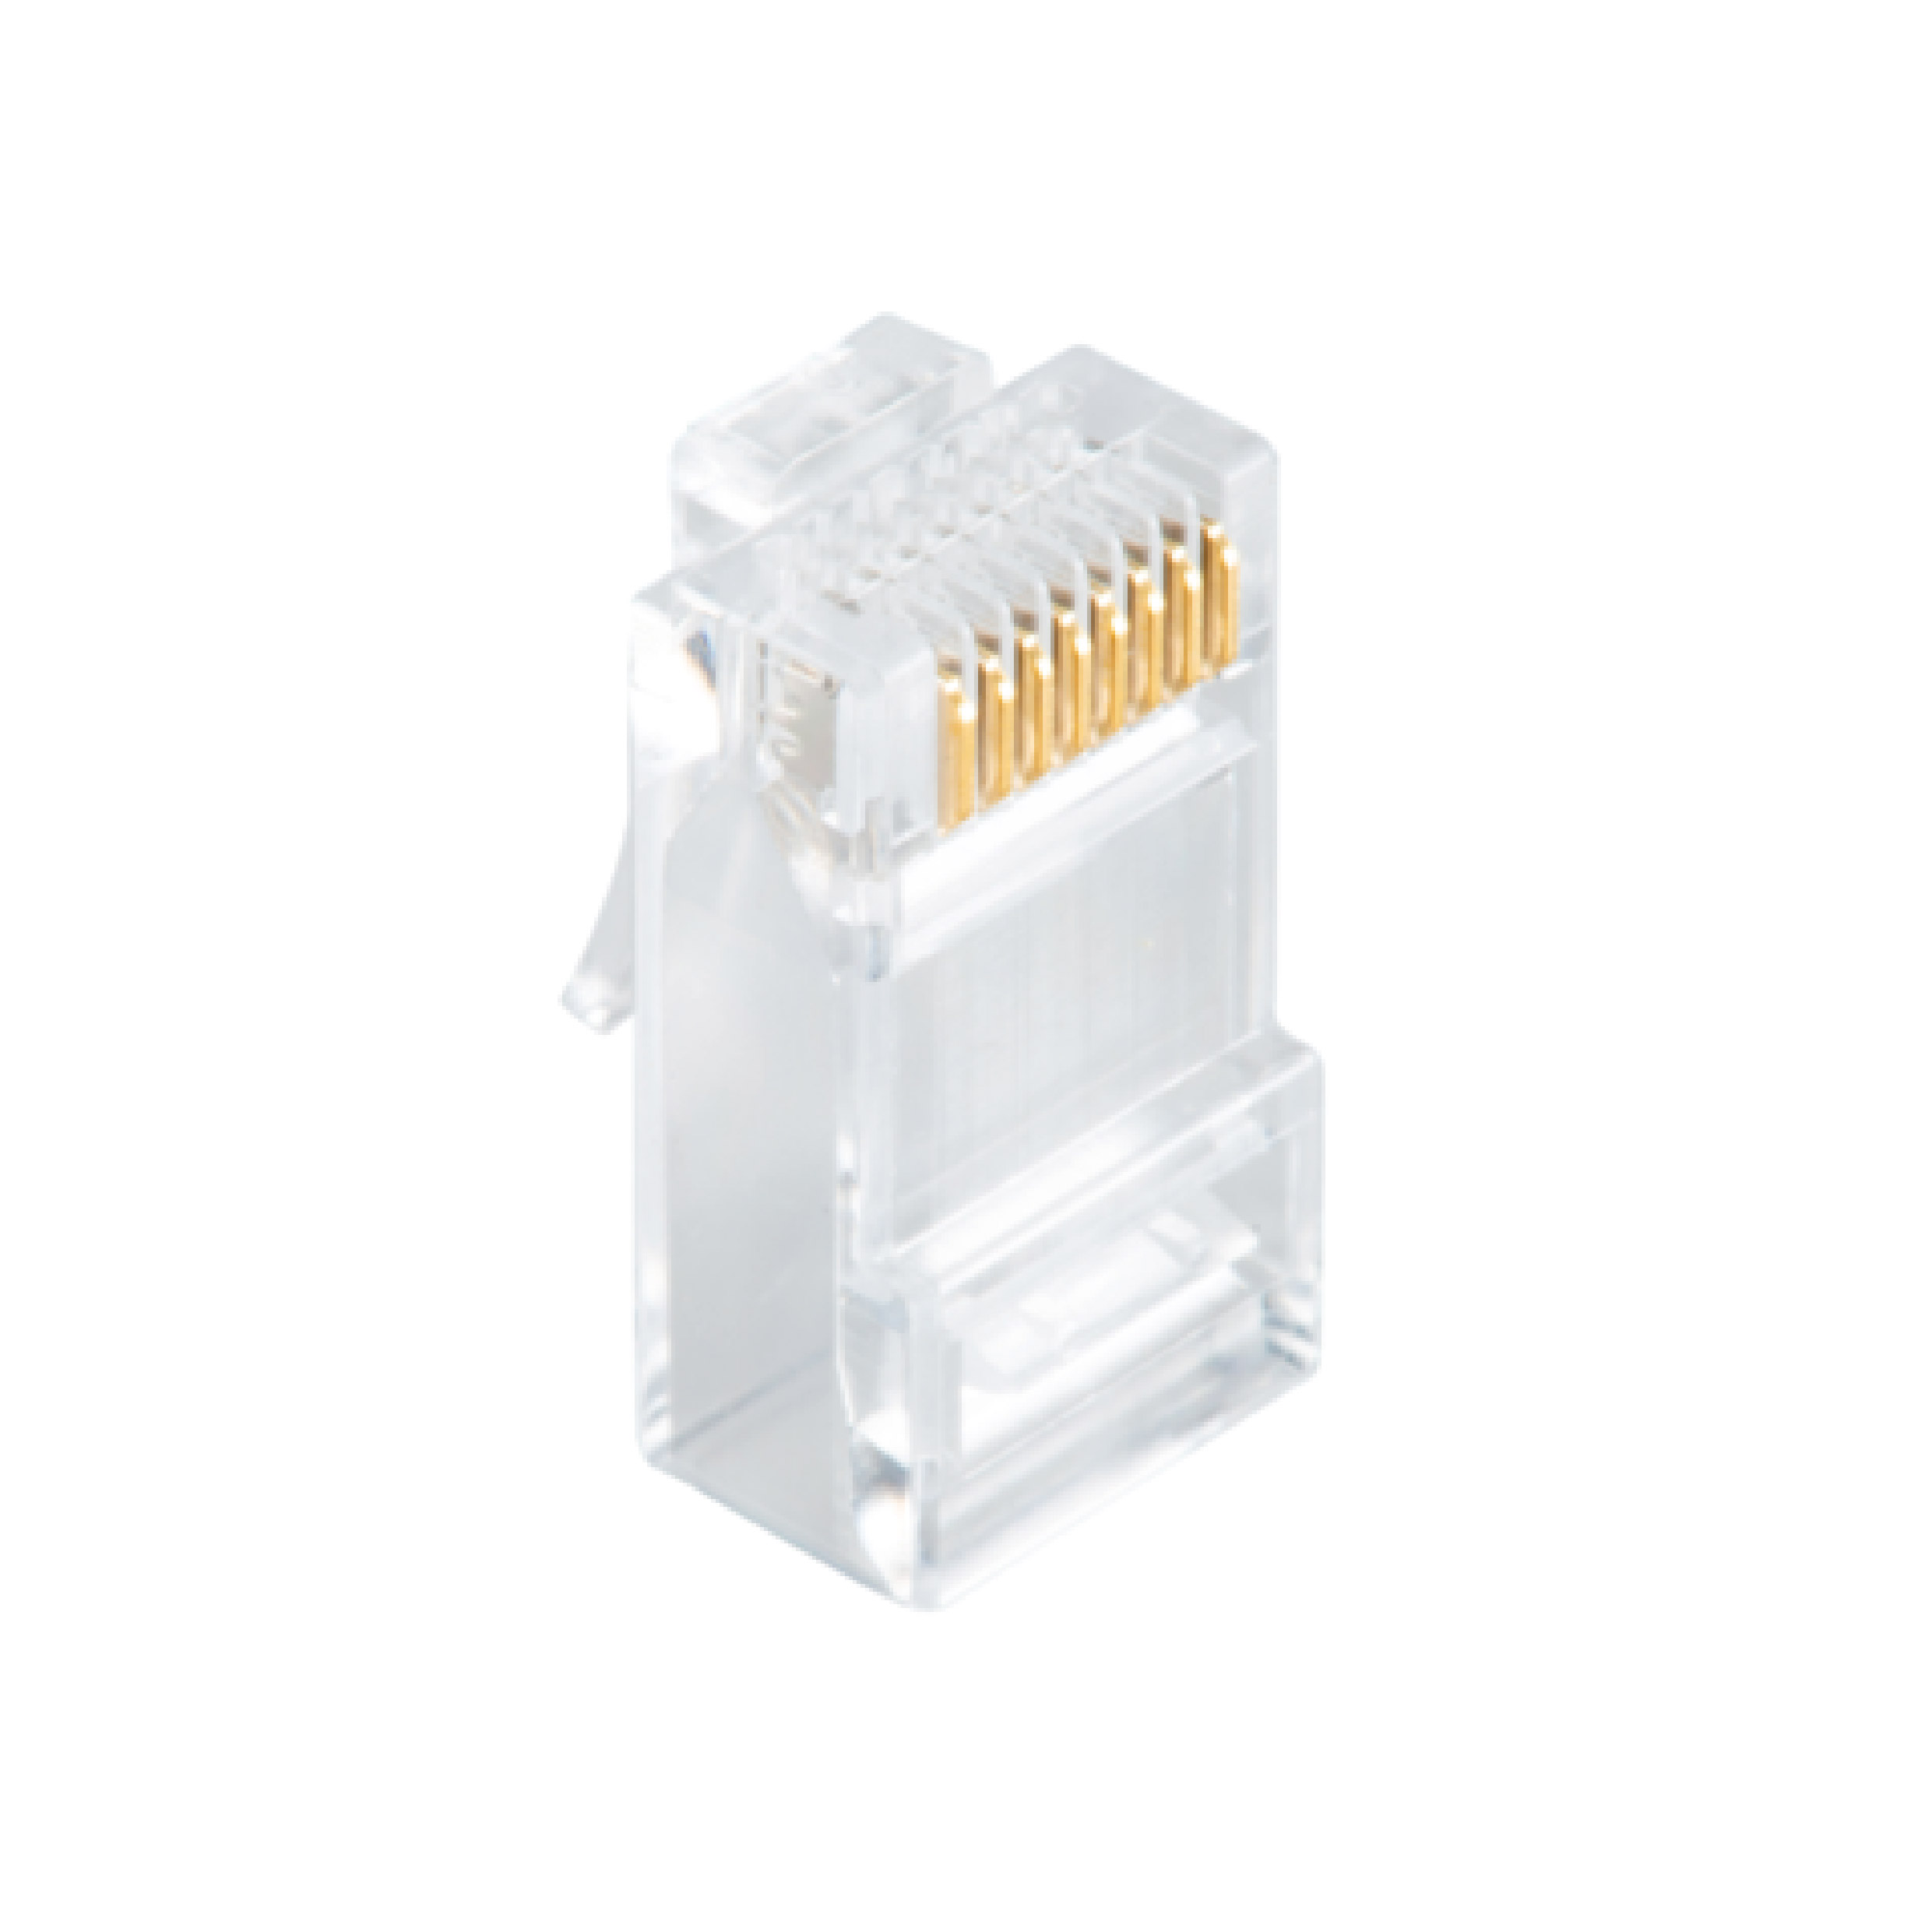 AMPLO CNT-C005 CAT6 RJ45 Network Connector (Normal)